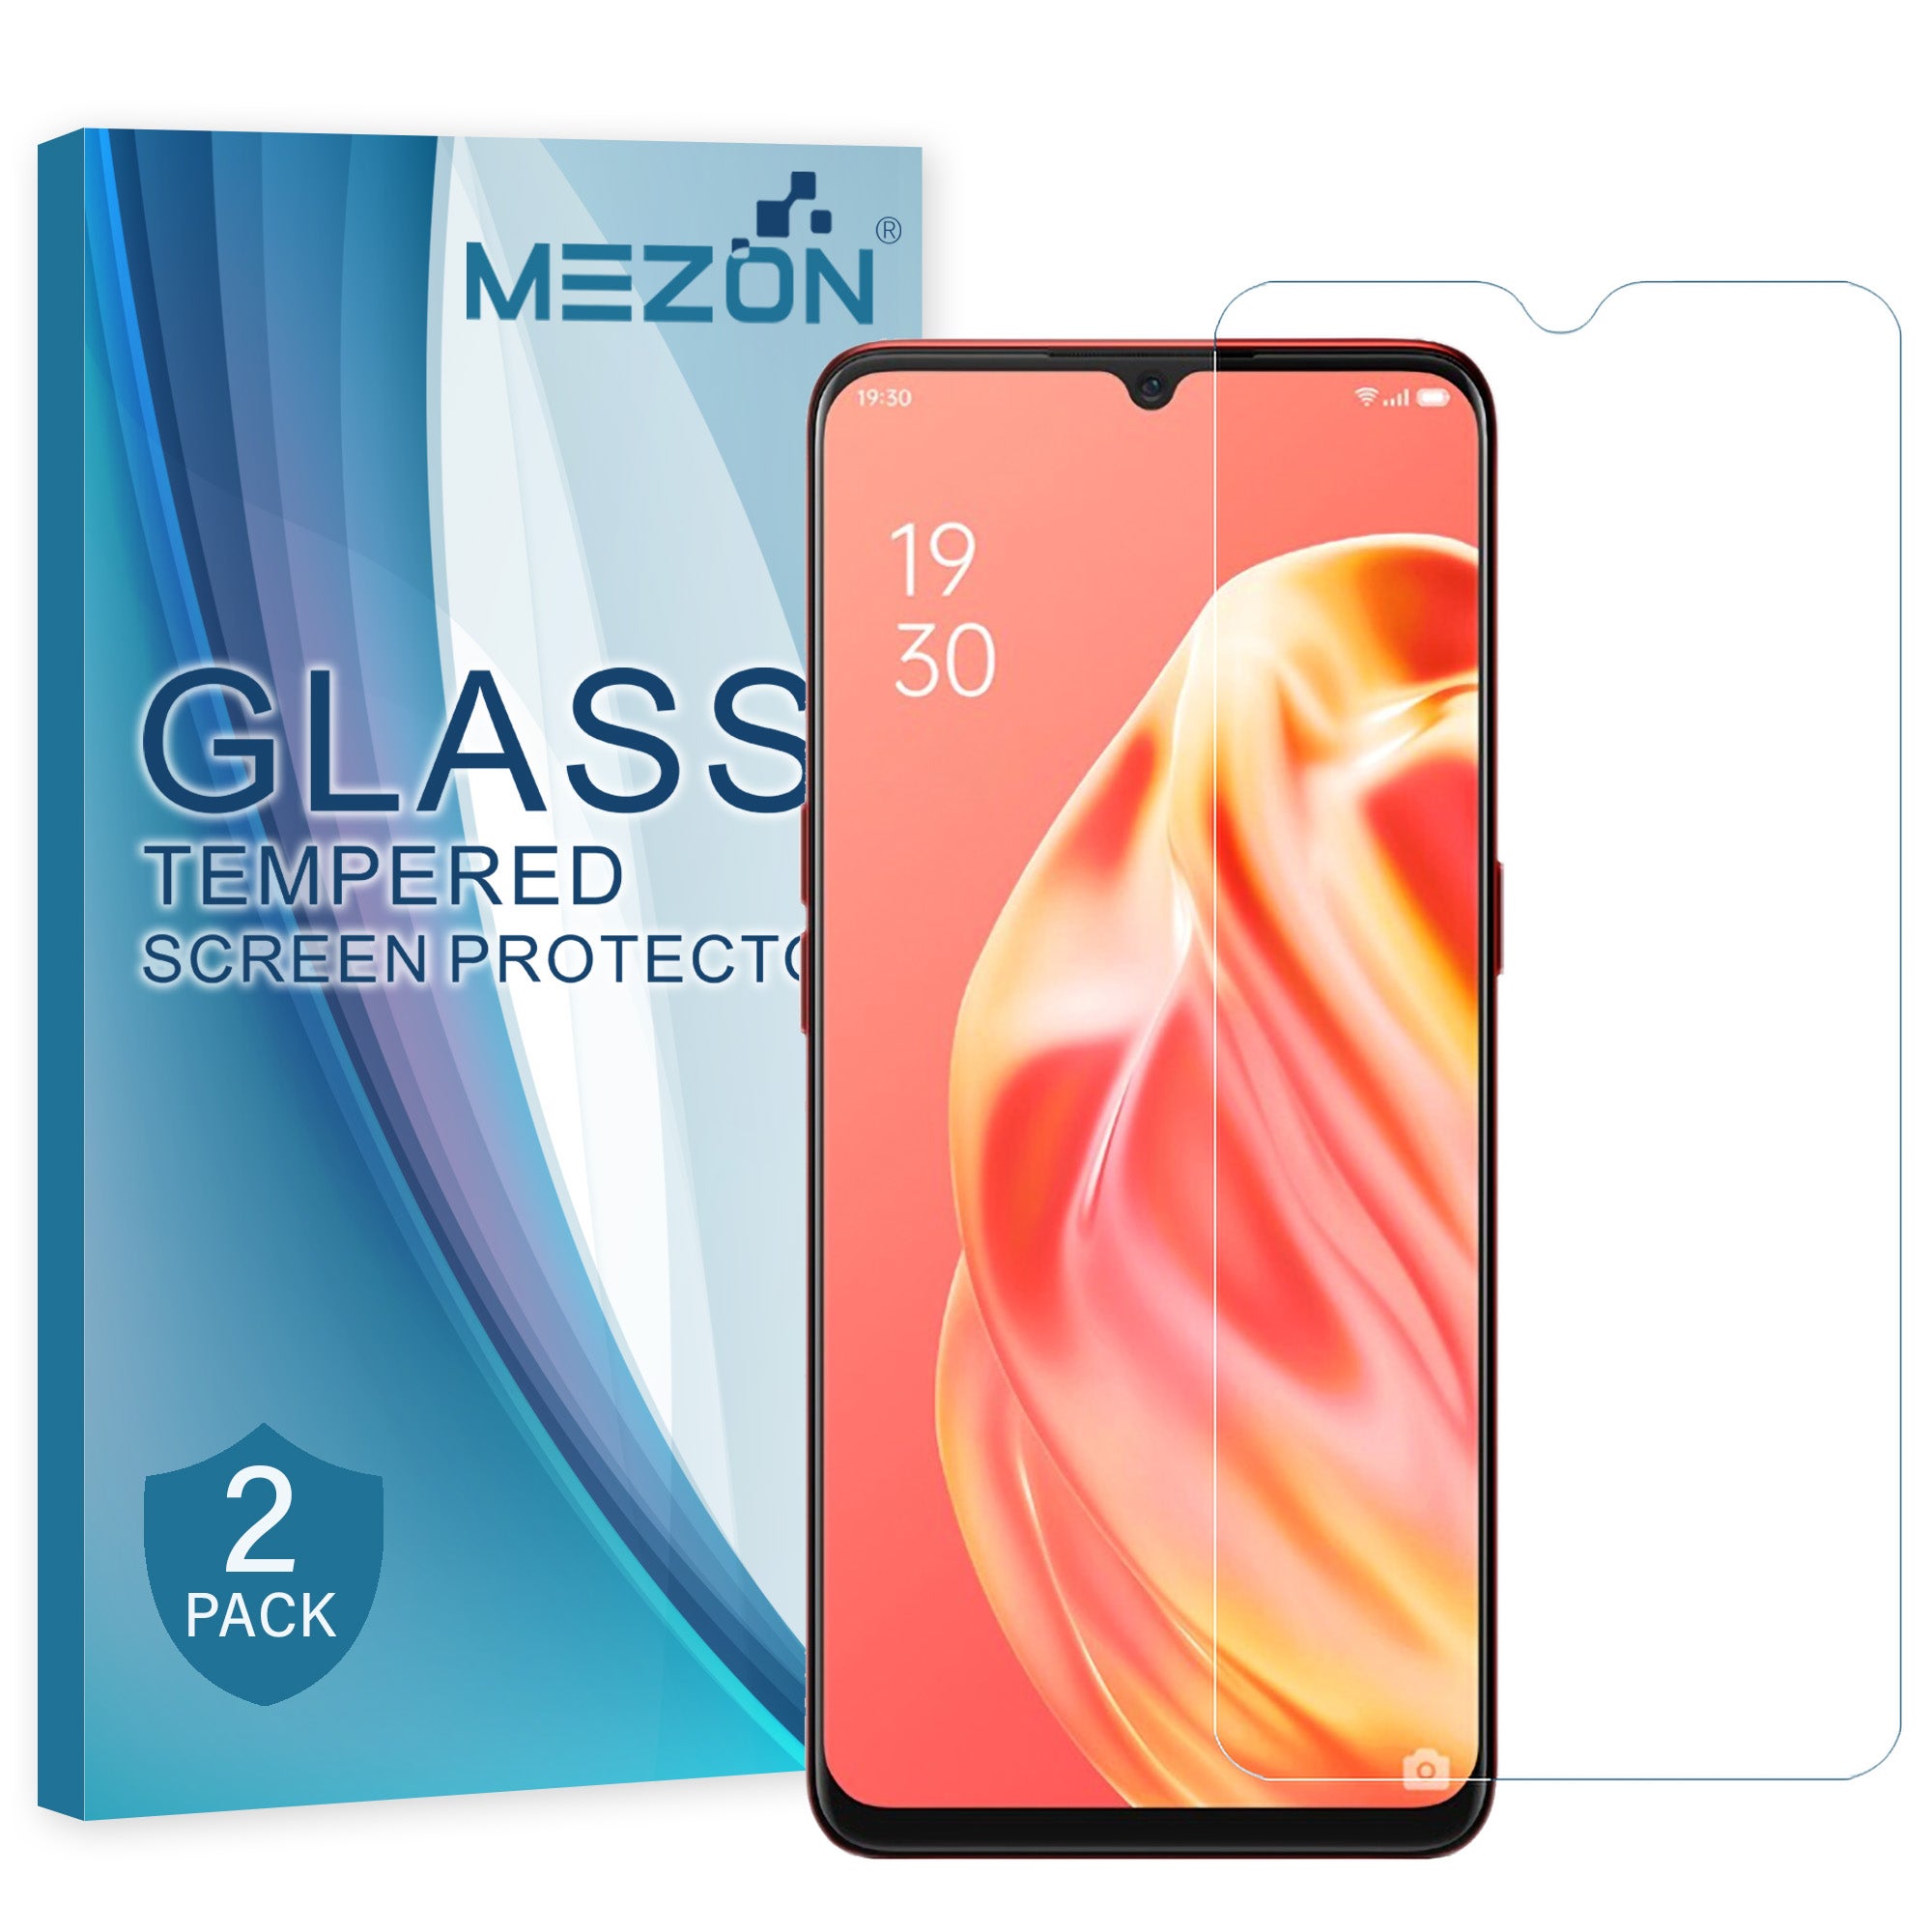 [2 Pack] Realme C12 Tempered Glass 9H HD Crystal Clear Premium Screen Protector by MEZON – Case Friendly, Shock Absorption (Realme C12, 9H)